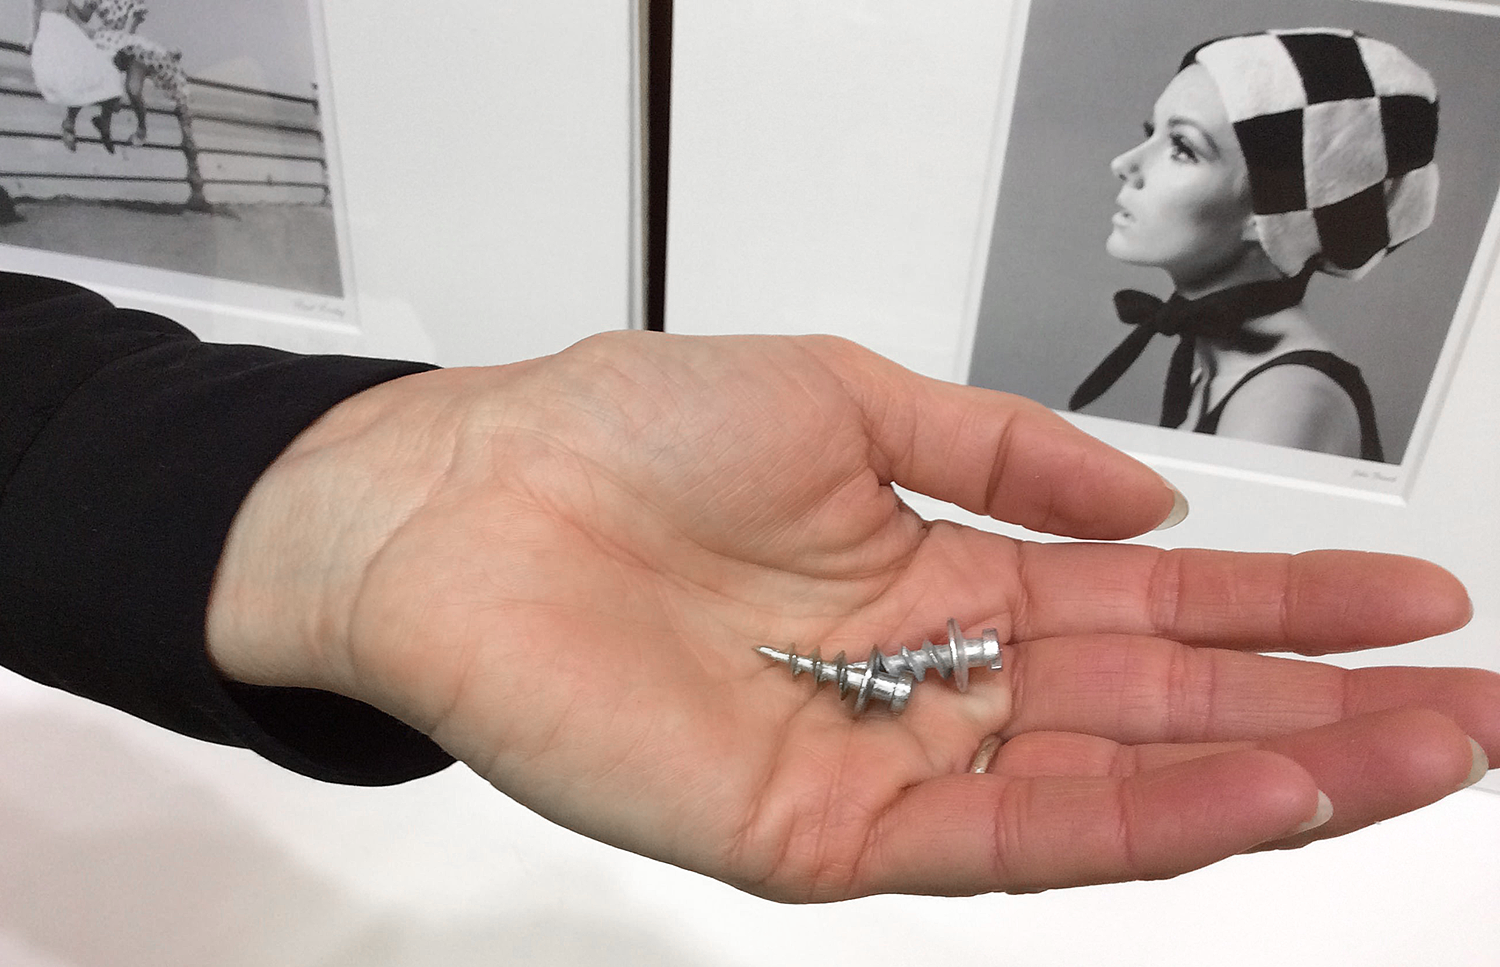 A picture of a person holding 2 DecoScrews in her hand. They securely hold up to 30 lbs in drywall so she is using them to hang a heavy mirror. 